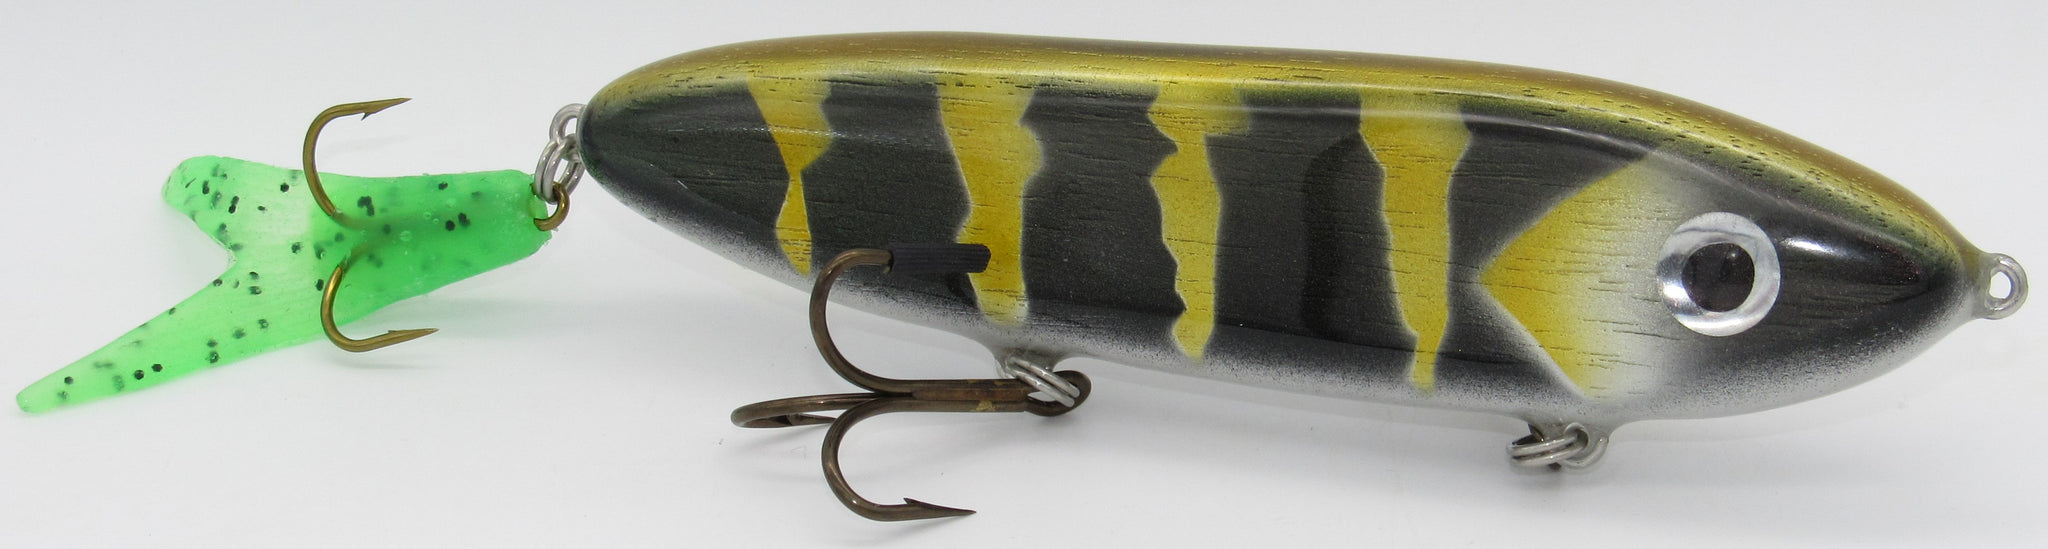 Hot Tail Gliders Regular – St Lawrence Musky Shop